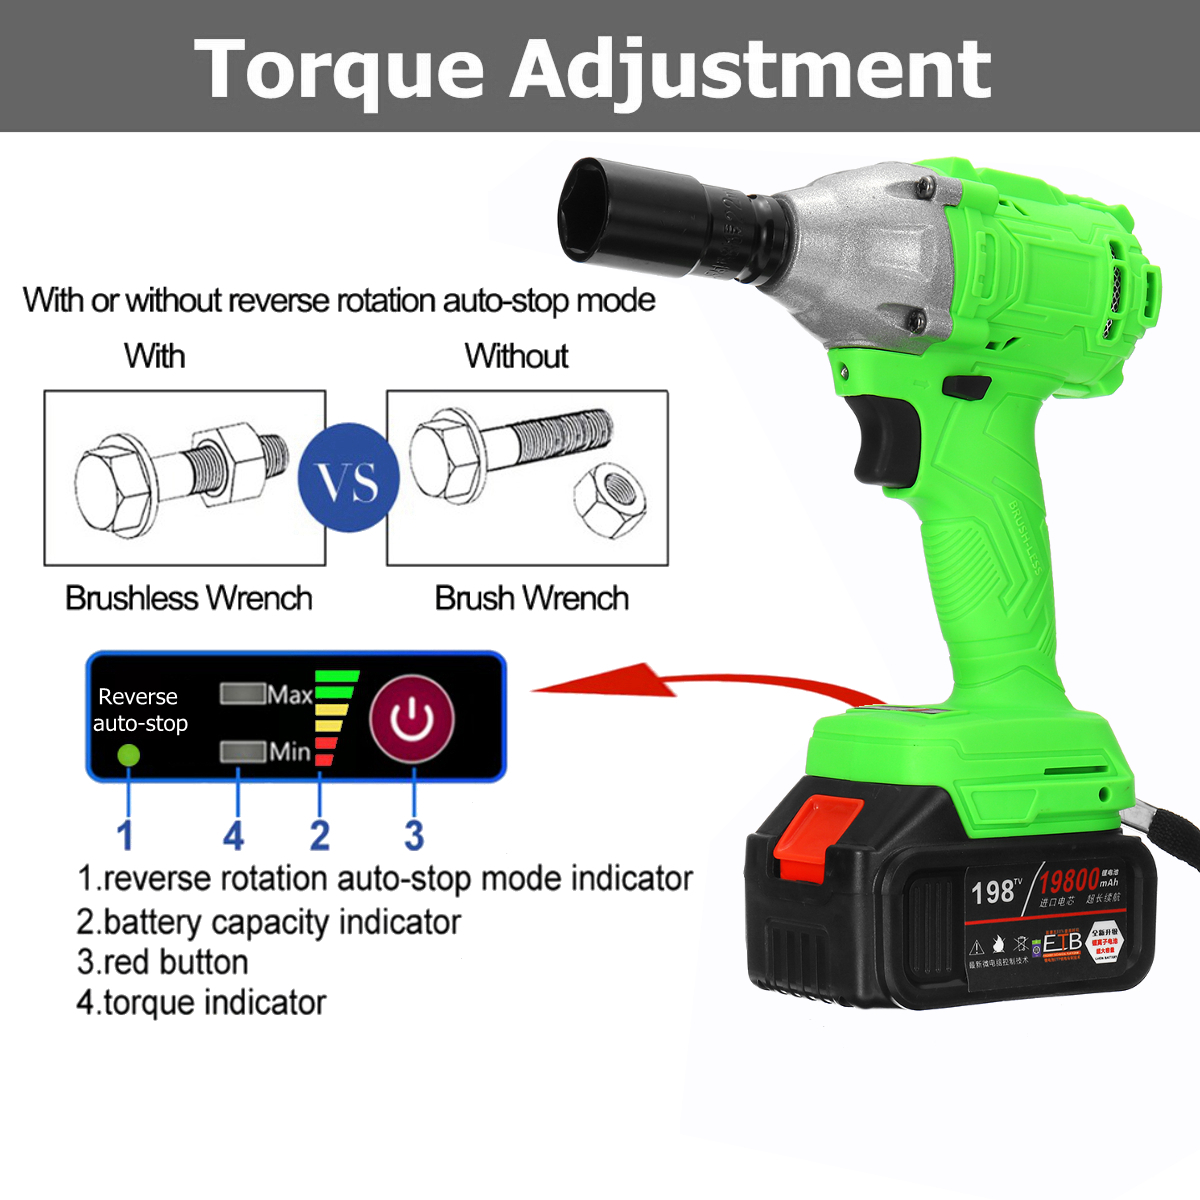 520Nm-198TV-19800mAh-Electric-Cordless-Impact-Wrench-Driver-Tool-12quot-Ratchet-Drive-Sockets-1618429-6